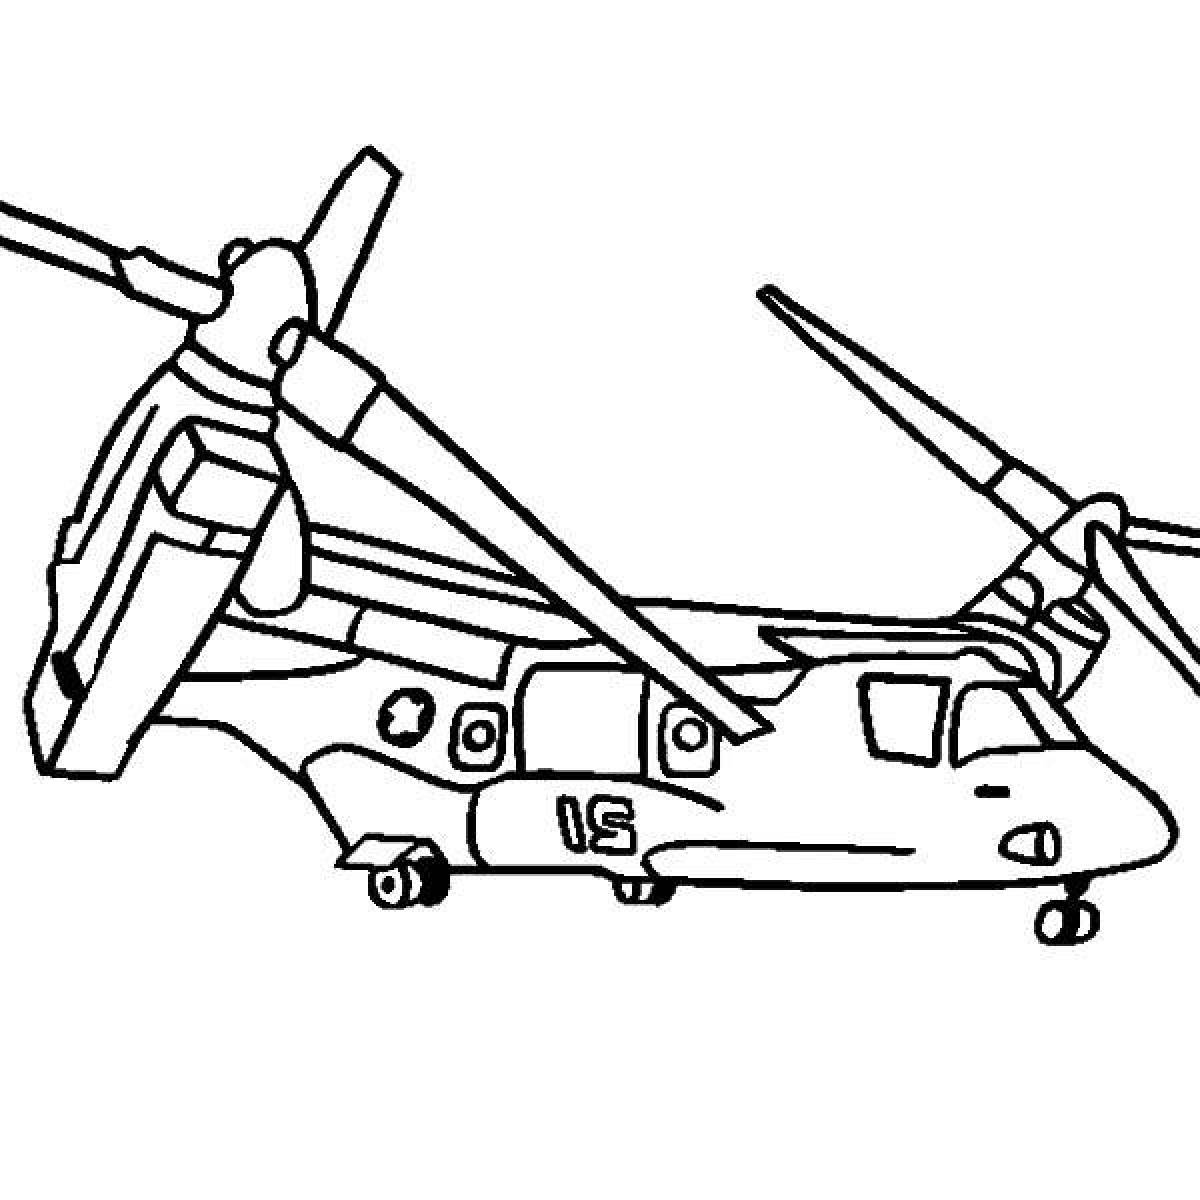 Royal military helicopter coloring page